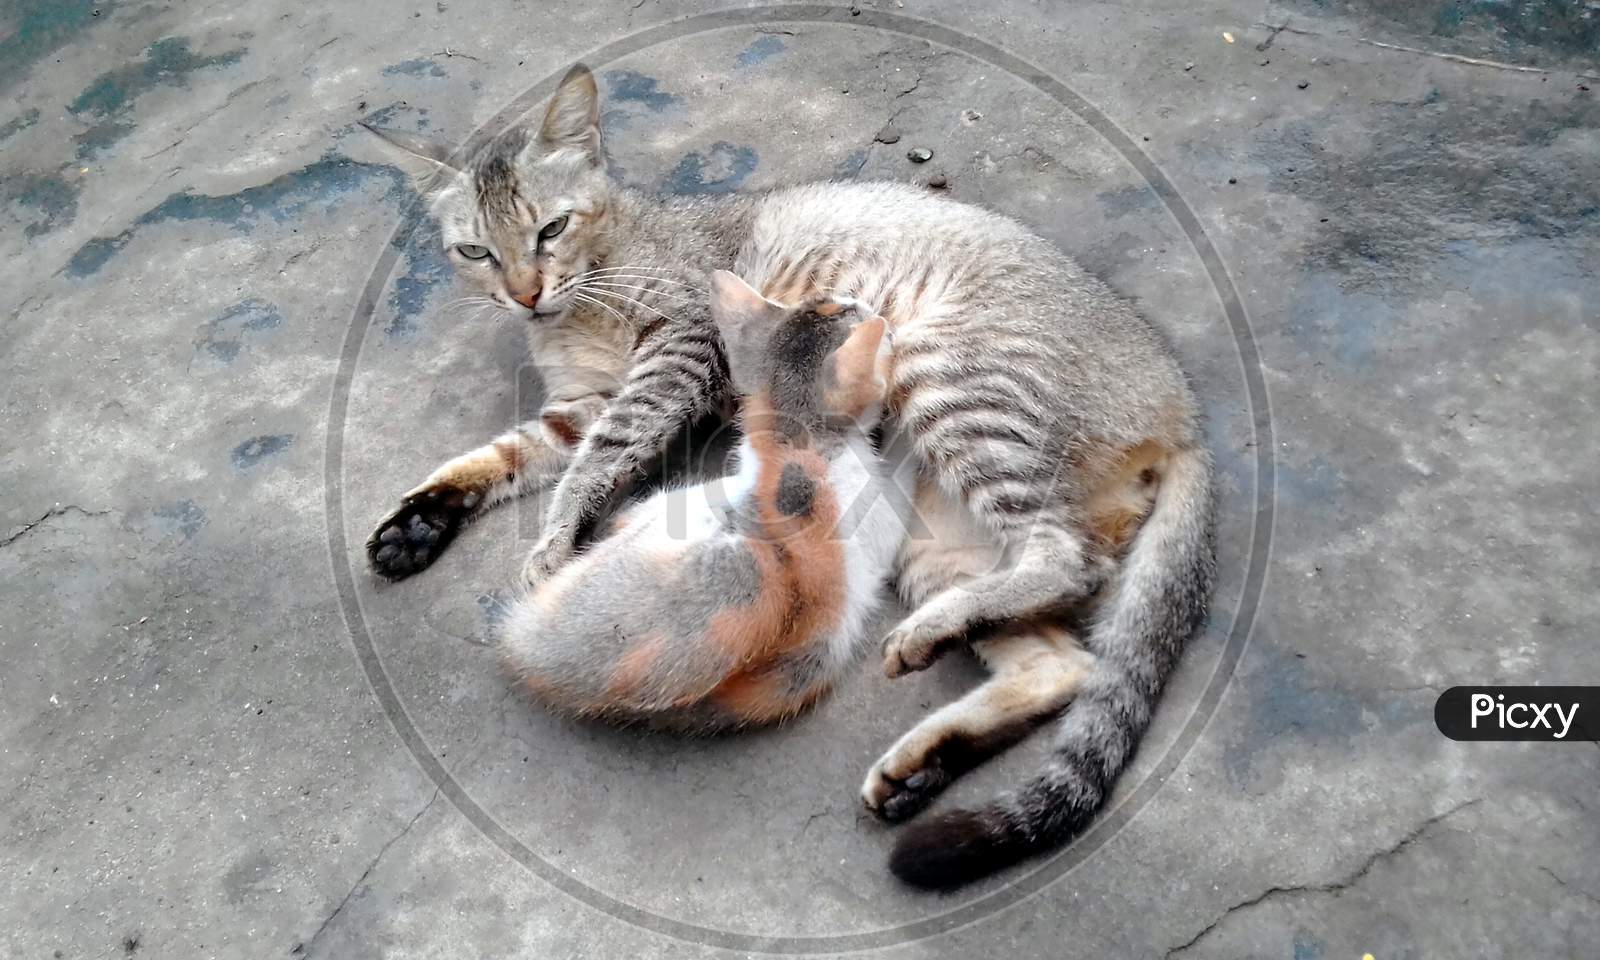 Image of the Indian cat looks like tiger sitting with it's baby ...